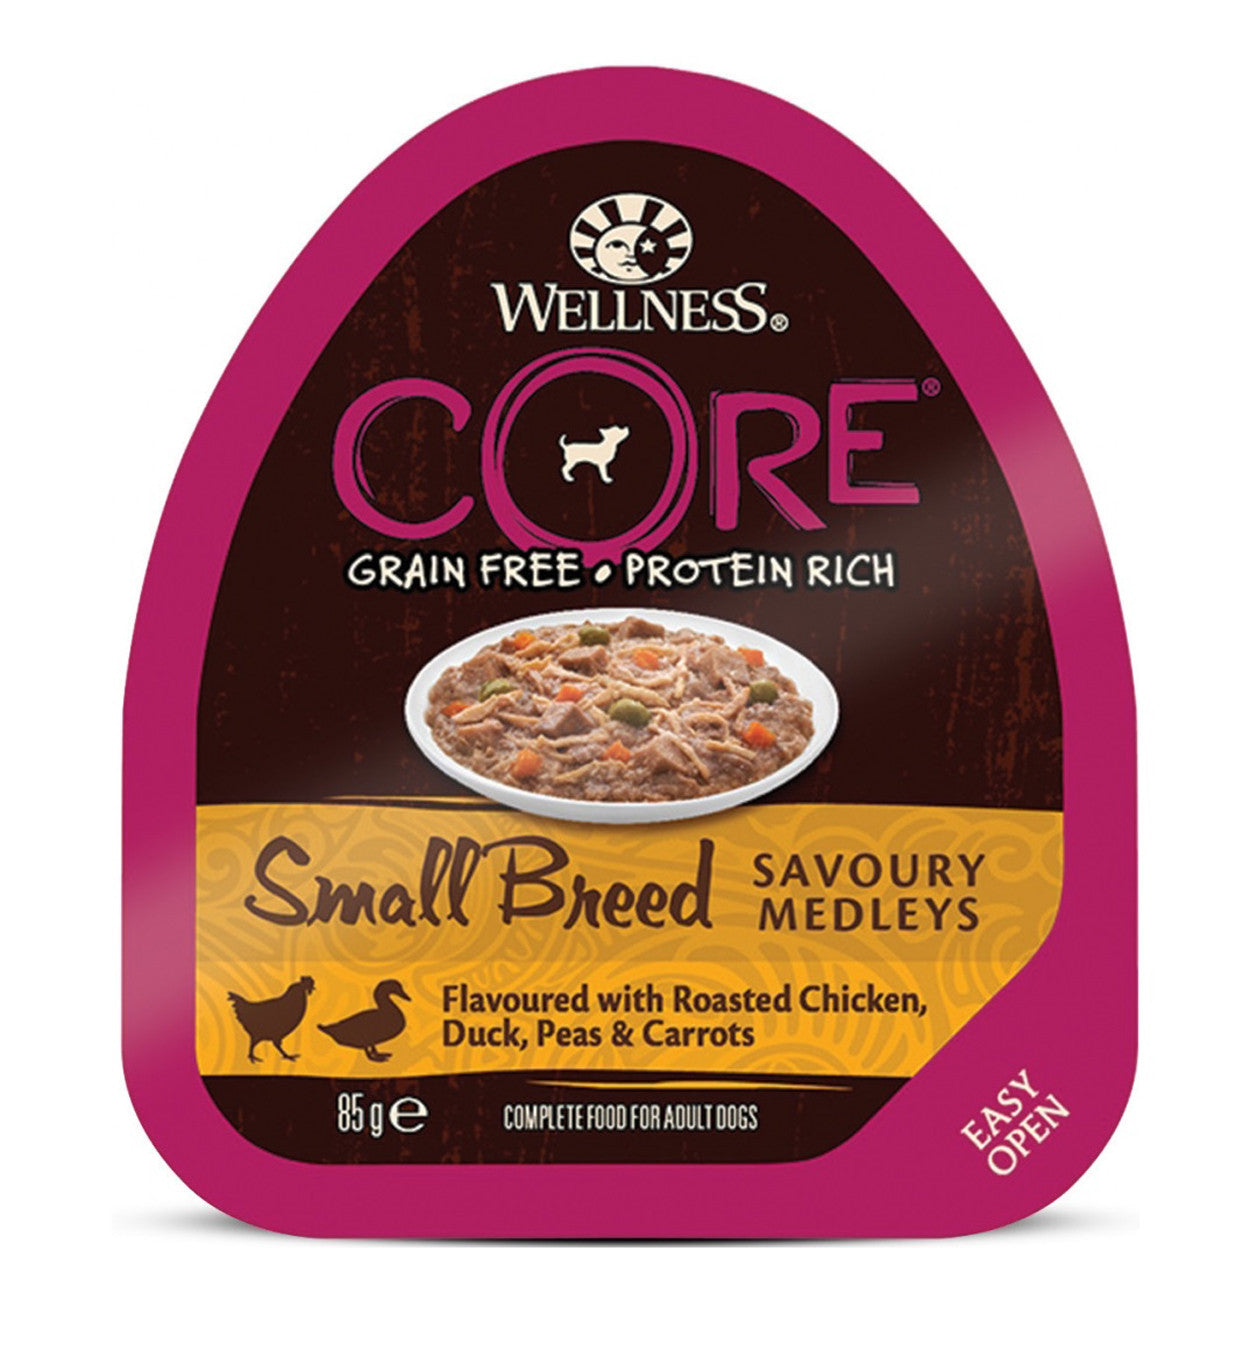 Wellness CORE Small Breed Savoury Medleys Flavoured with Chicken, Duck, Peas & Carrots, 85g